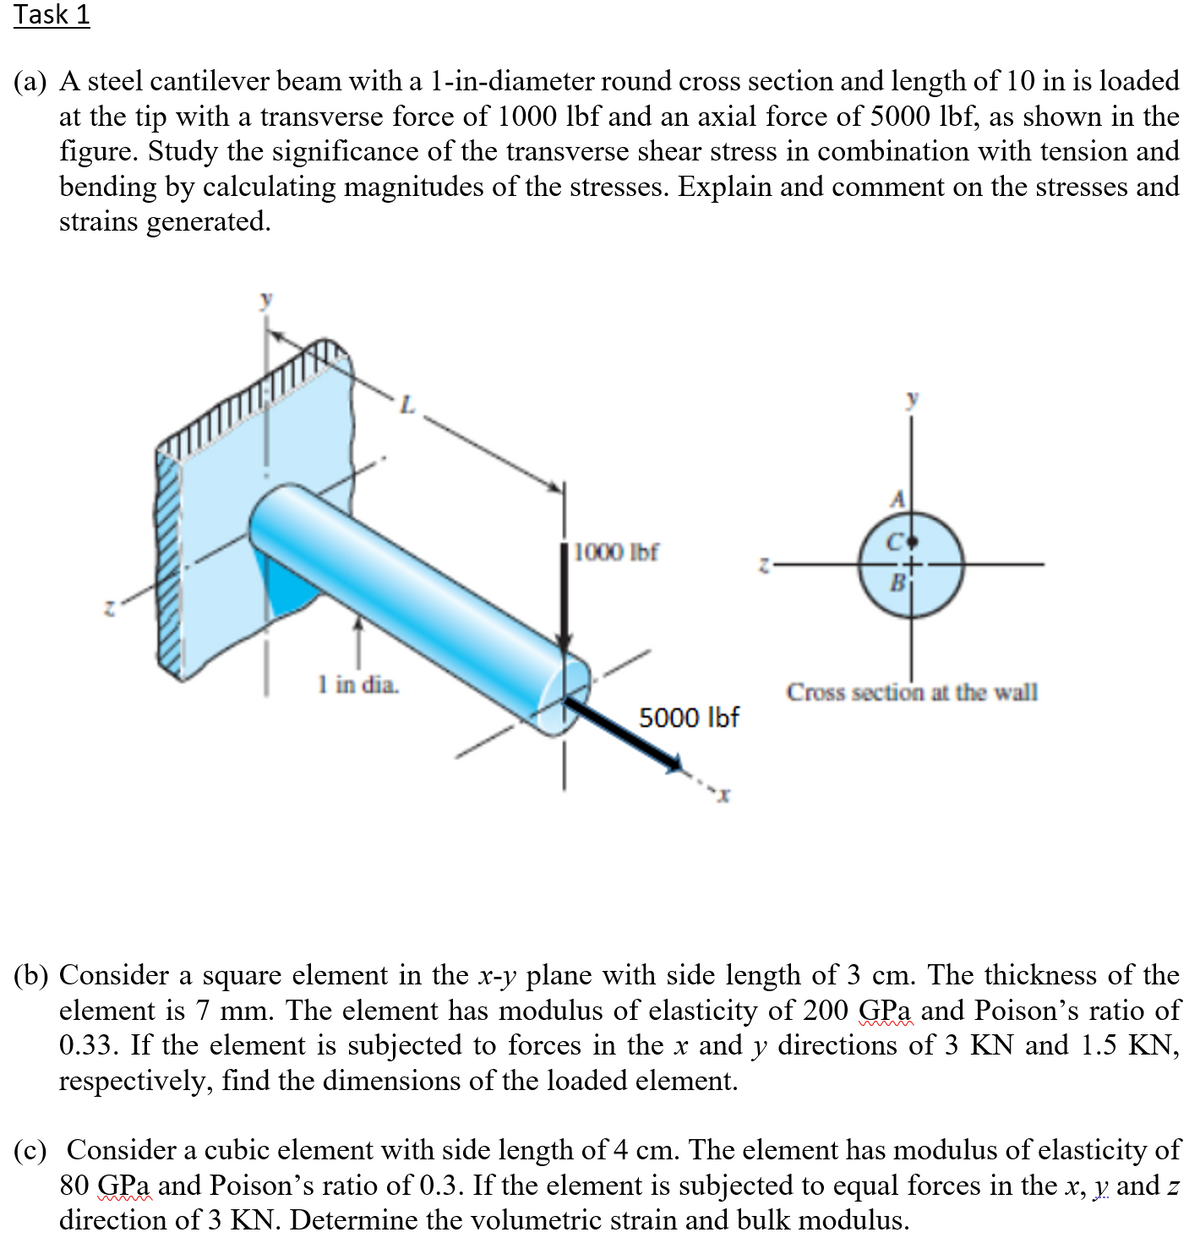 Task 1
(a) A steel cantilever beam with a 1-in-diameter round cross section and length of 10 in is loaded
at the tip with a transverse force of 1000 lbf and an axial force of 5000 lbf, as shown in the
figure. Study the significance of the transverse shear stress in combination with tension and
bending by calculating magnitudes of the stresses. Explain and comment on the stresses and
strains generated.
1000 Ibf
1 in dia.
Cross section at the wall
5000 Ibf
(b) Consider a square element in the x-y plane with side length of 3 cm. The thickness of the
element is 7 mm. The element has modulus of elasticity of 200 GPa and Poison's ratio of
0.33. If the element is subjected to forces in the x and y directions of 3 KN and 1.5 KN,
respectively, find the dimensions of the loaded element.
(c) Consider a cubic element with side length of 4 cm. The element has modulus of elasticity of
80 GPa and Poison's ratio of 0.3. If the element is subjected to equal forces in the x, y and z
direction of 3 KN. Determine the volumetric strain and bulk modulus.
